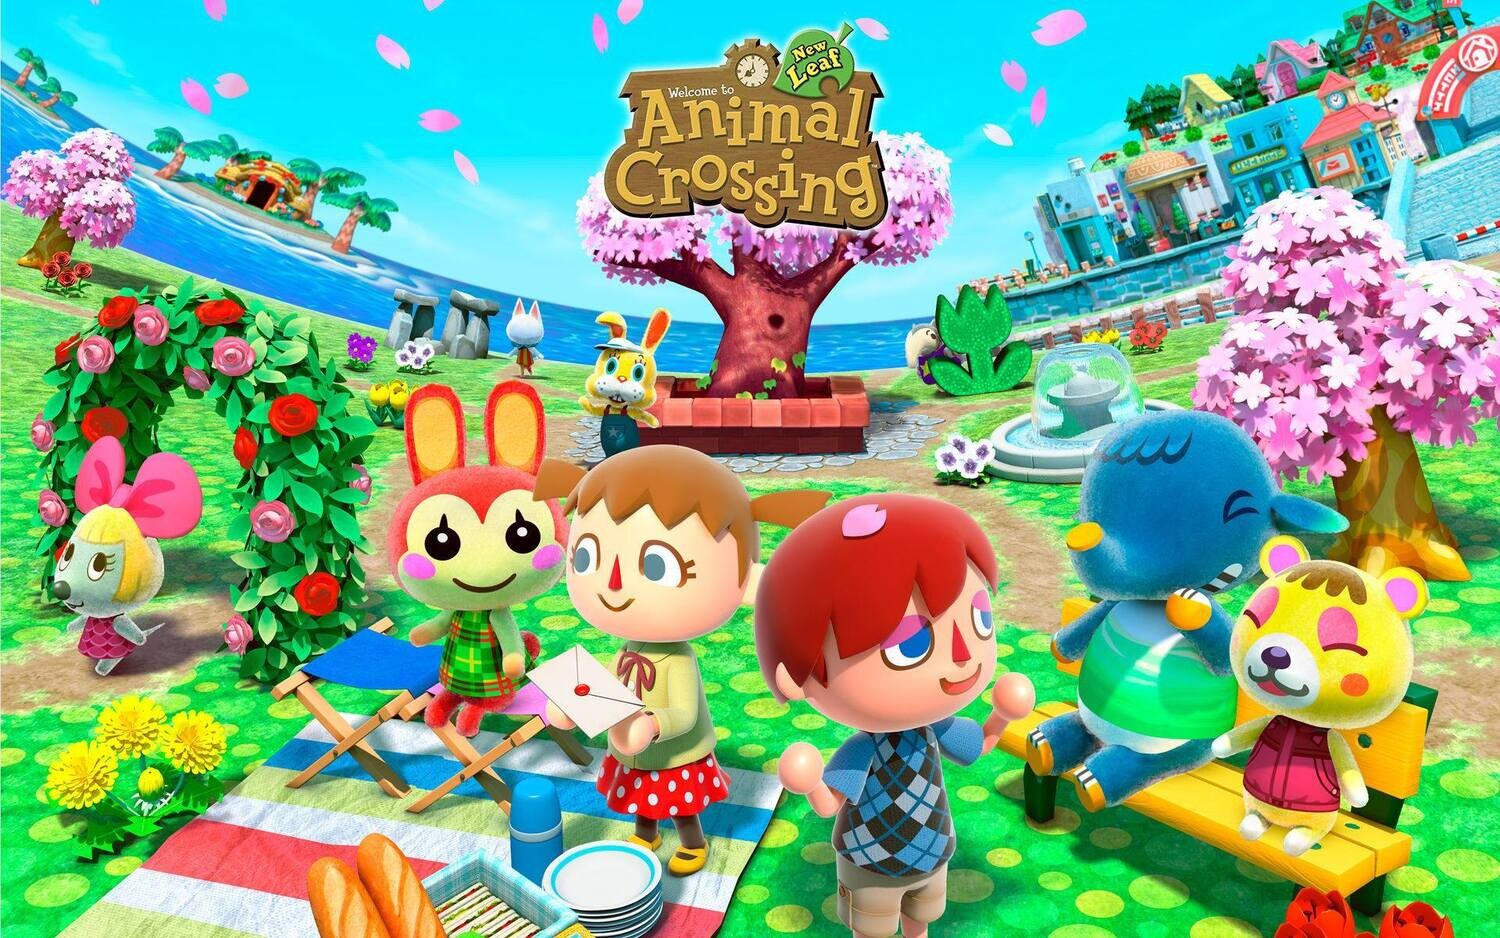 Animal Crossing - 30 x 40cm Full Drill (Square) Diamond Painting Kit - Currently in stock